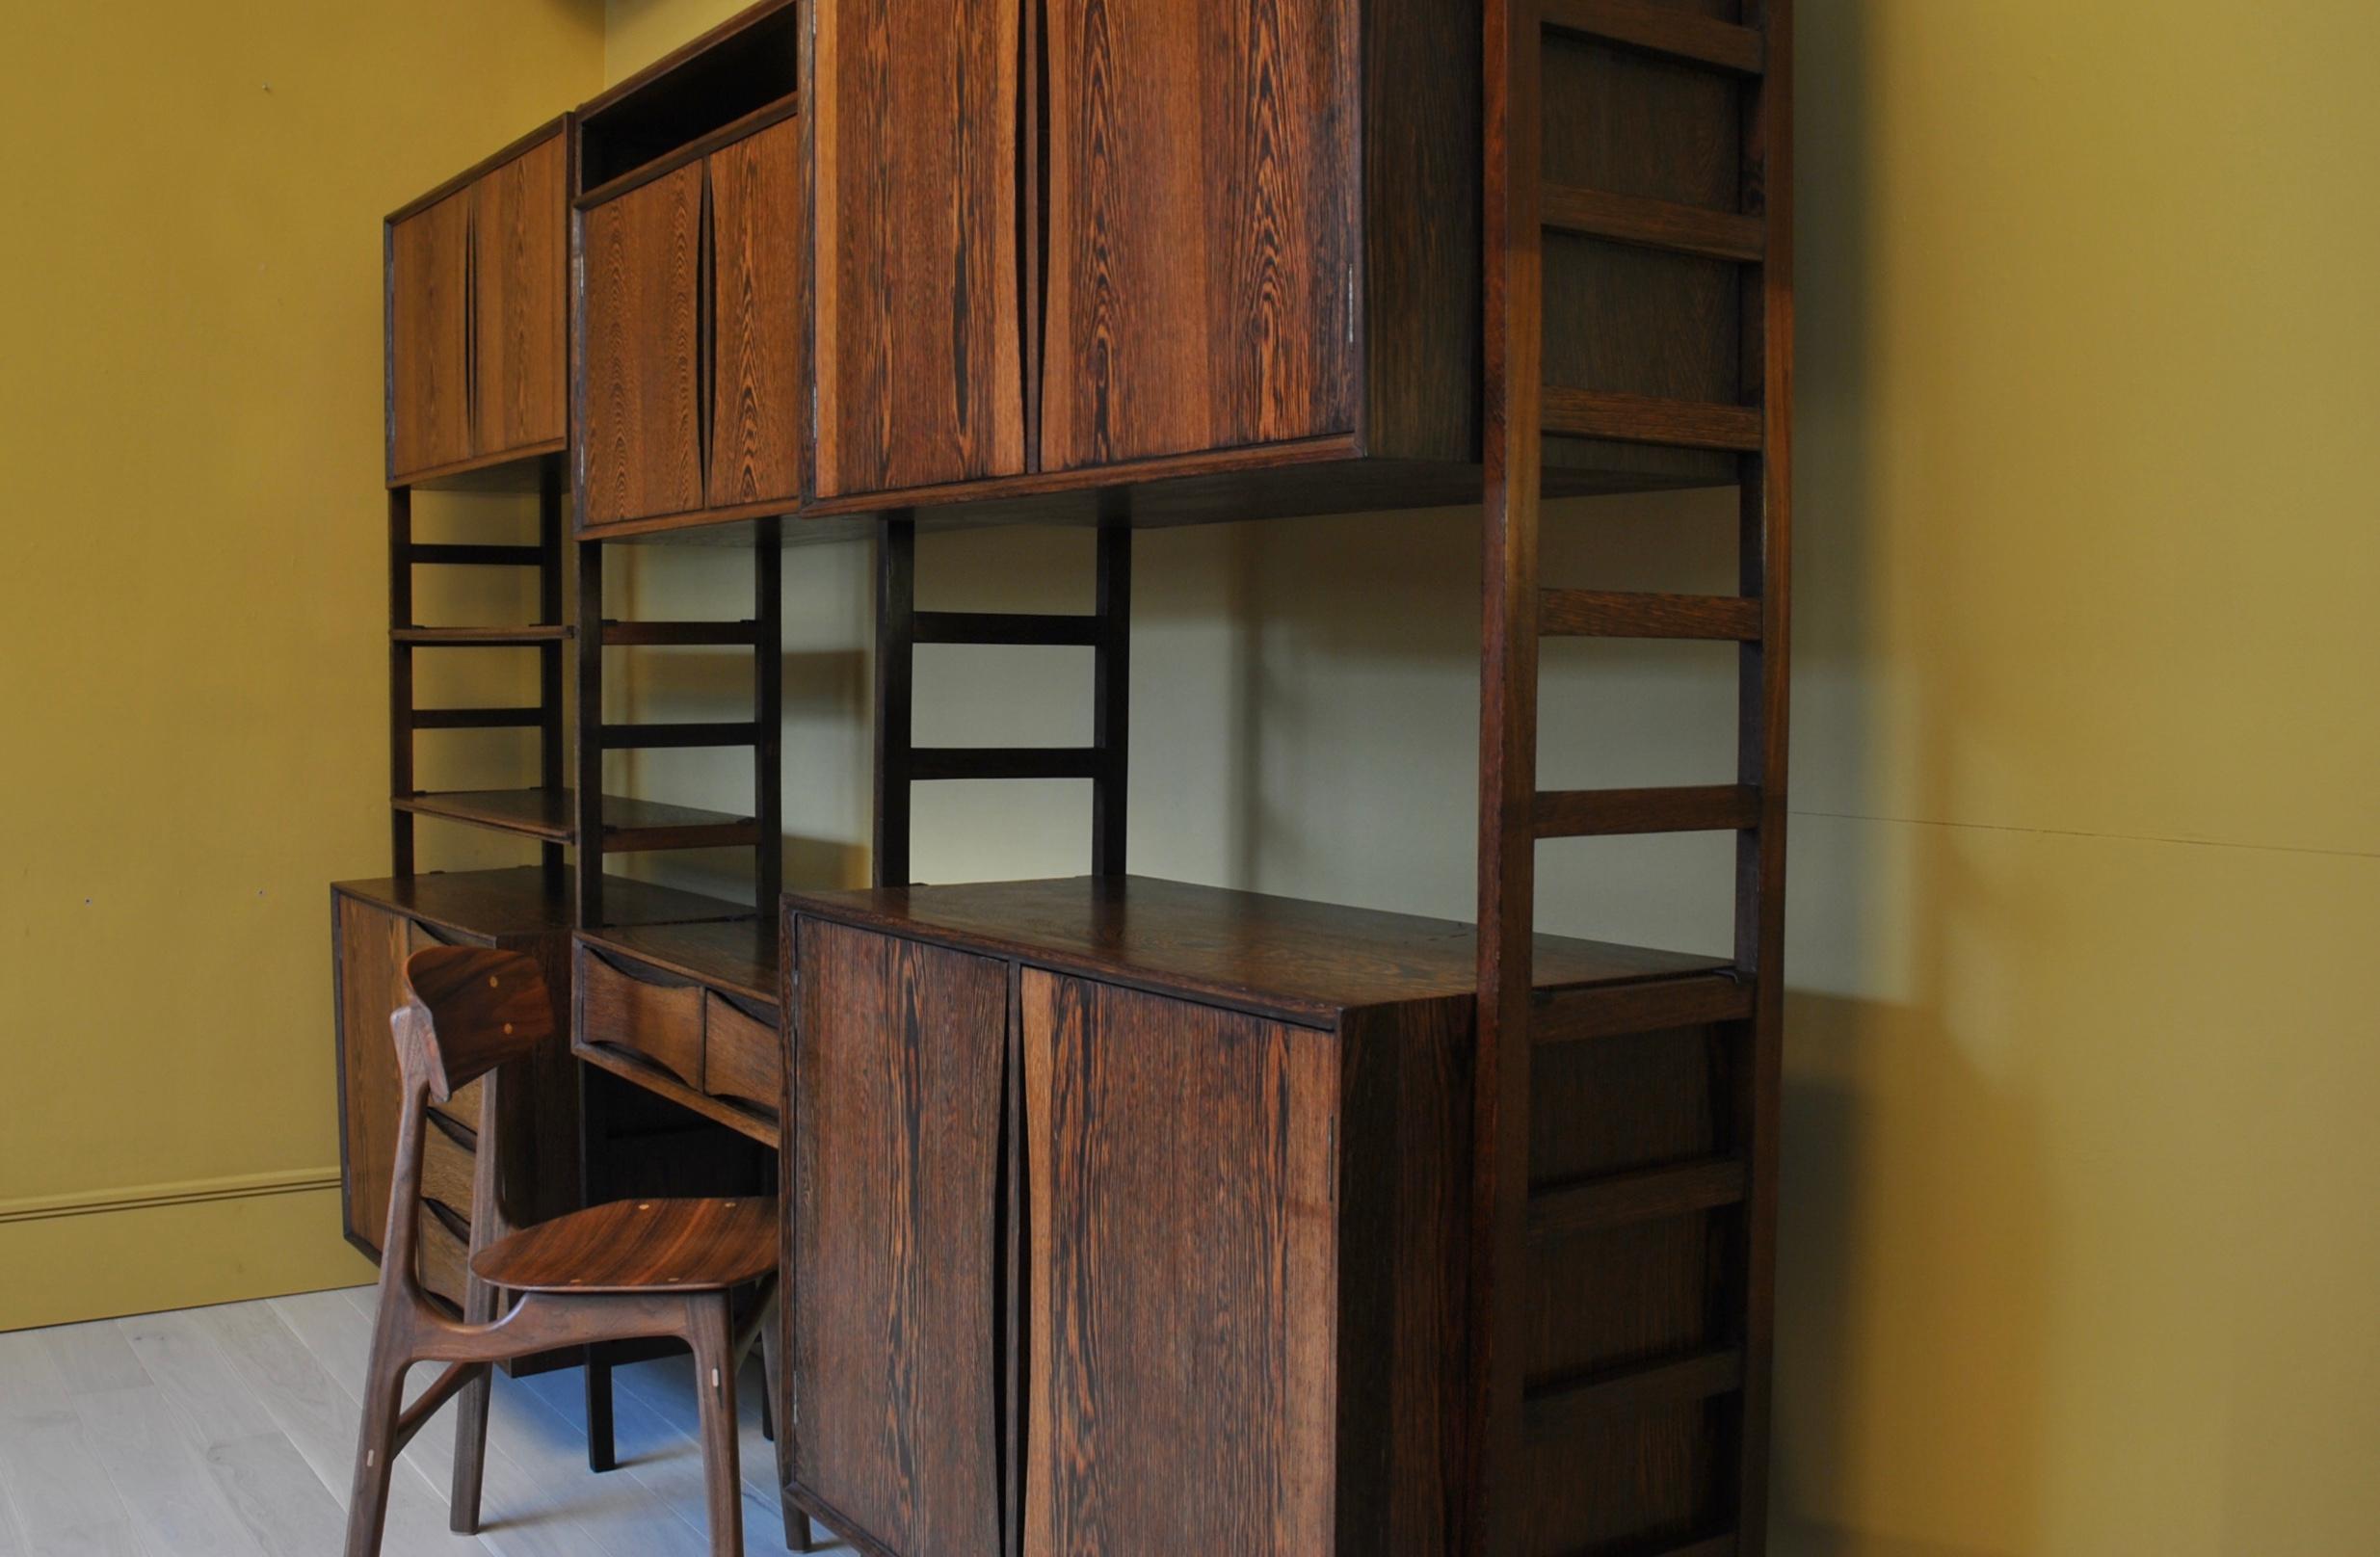 An extremely unusual and totally customizable modular wall unit system from Belgium, circa 1960. Very rare to see such furniture made from Wengé. It has the most glorious grain and there really isn’t much of a comparison to other timbers. A